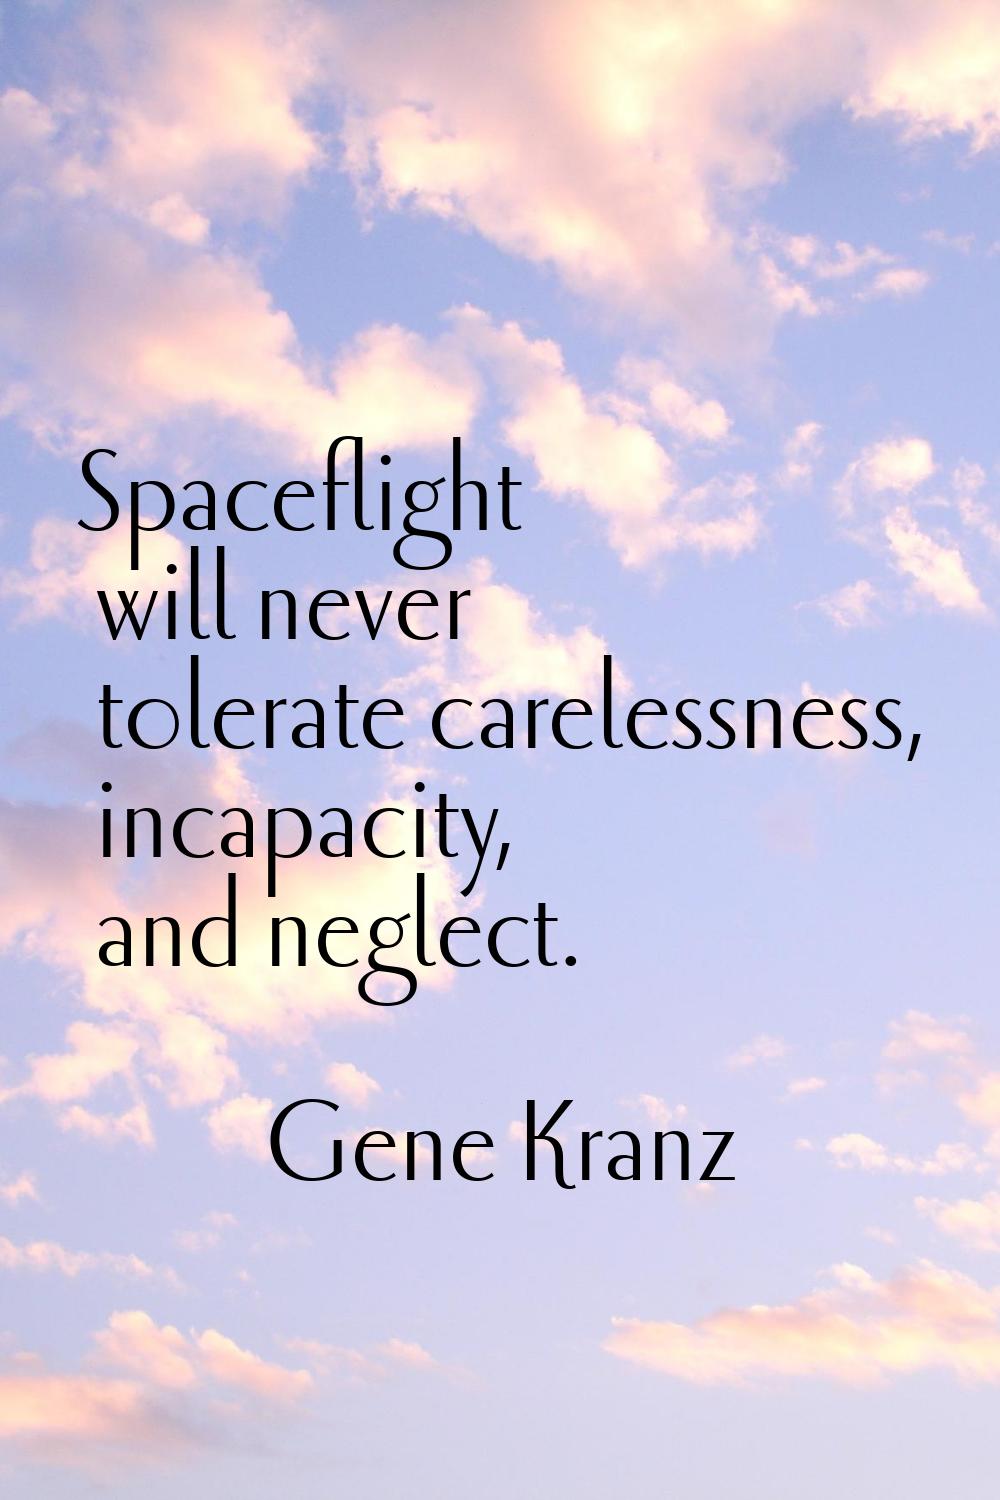 Spaceflight will never tolerate carelessness, incapacity, and neglect.